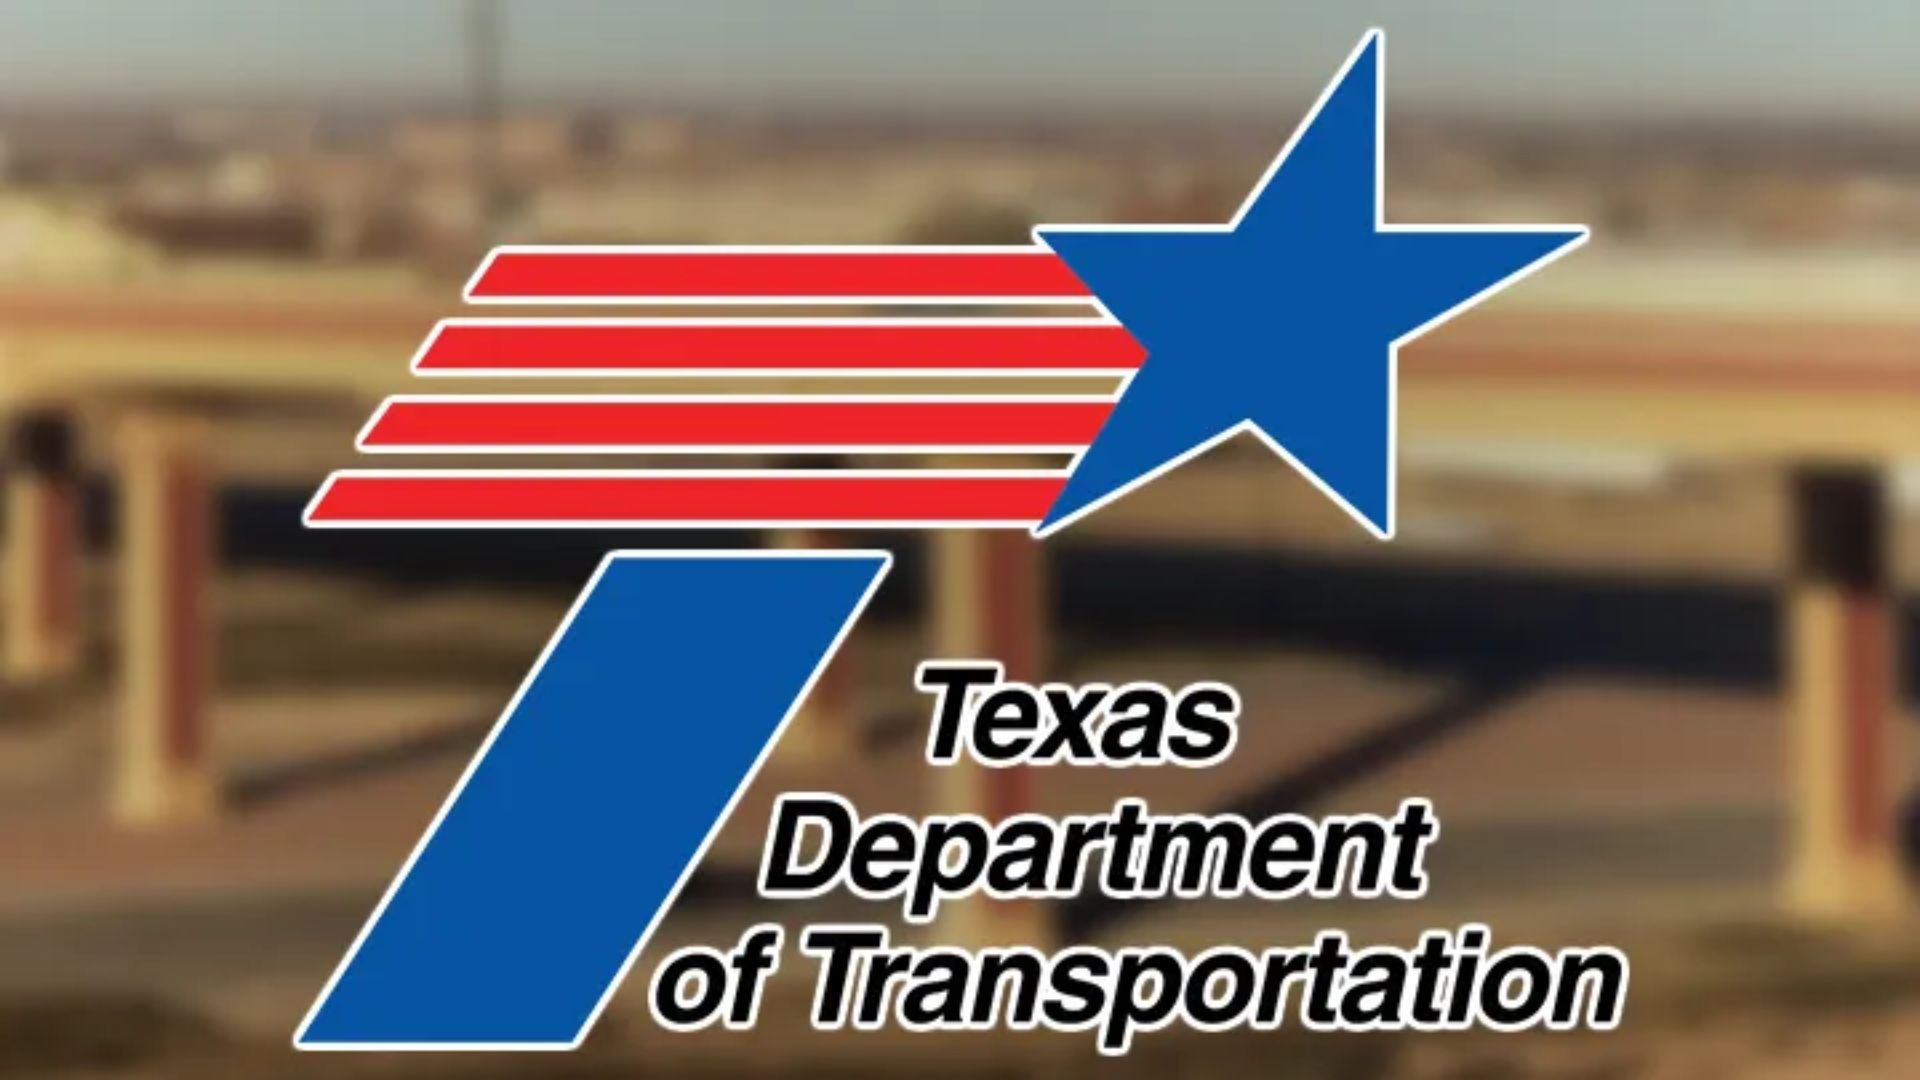 Austin, Texas - The Texas Department of Transportation (TxDOT) held its third and final meeting on Thursday night to hear what people think about a study aimed at improving travel between Austin and San Antonio via the I-35 corridor.